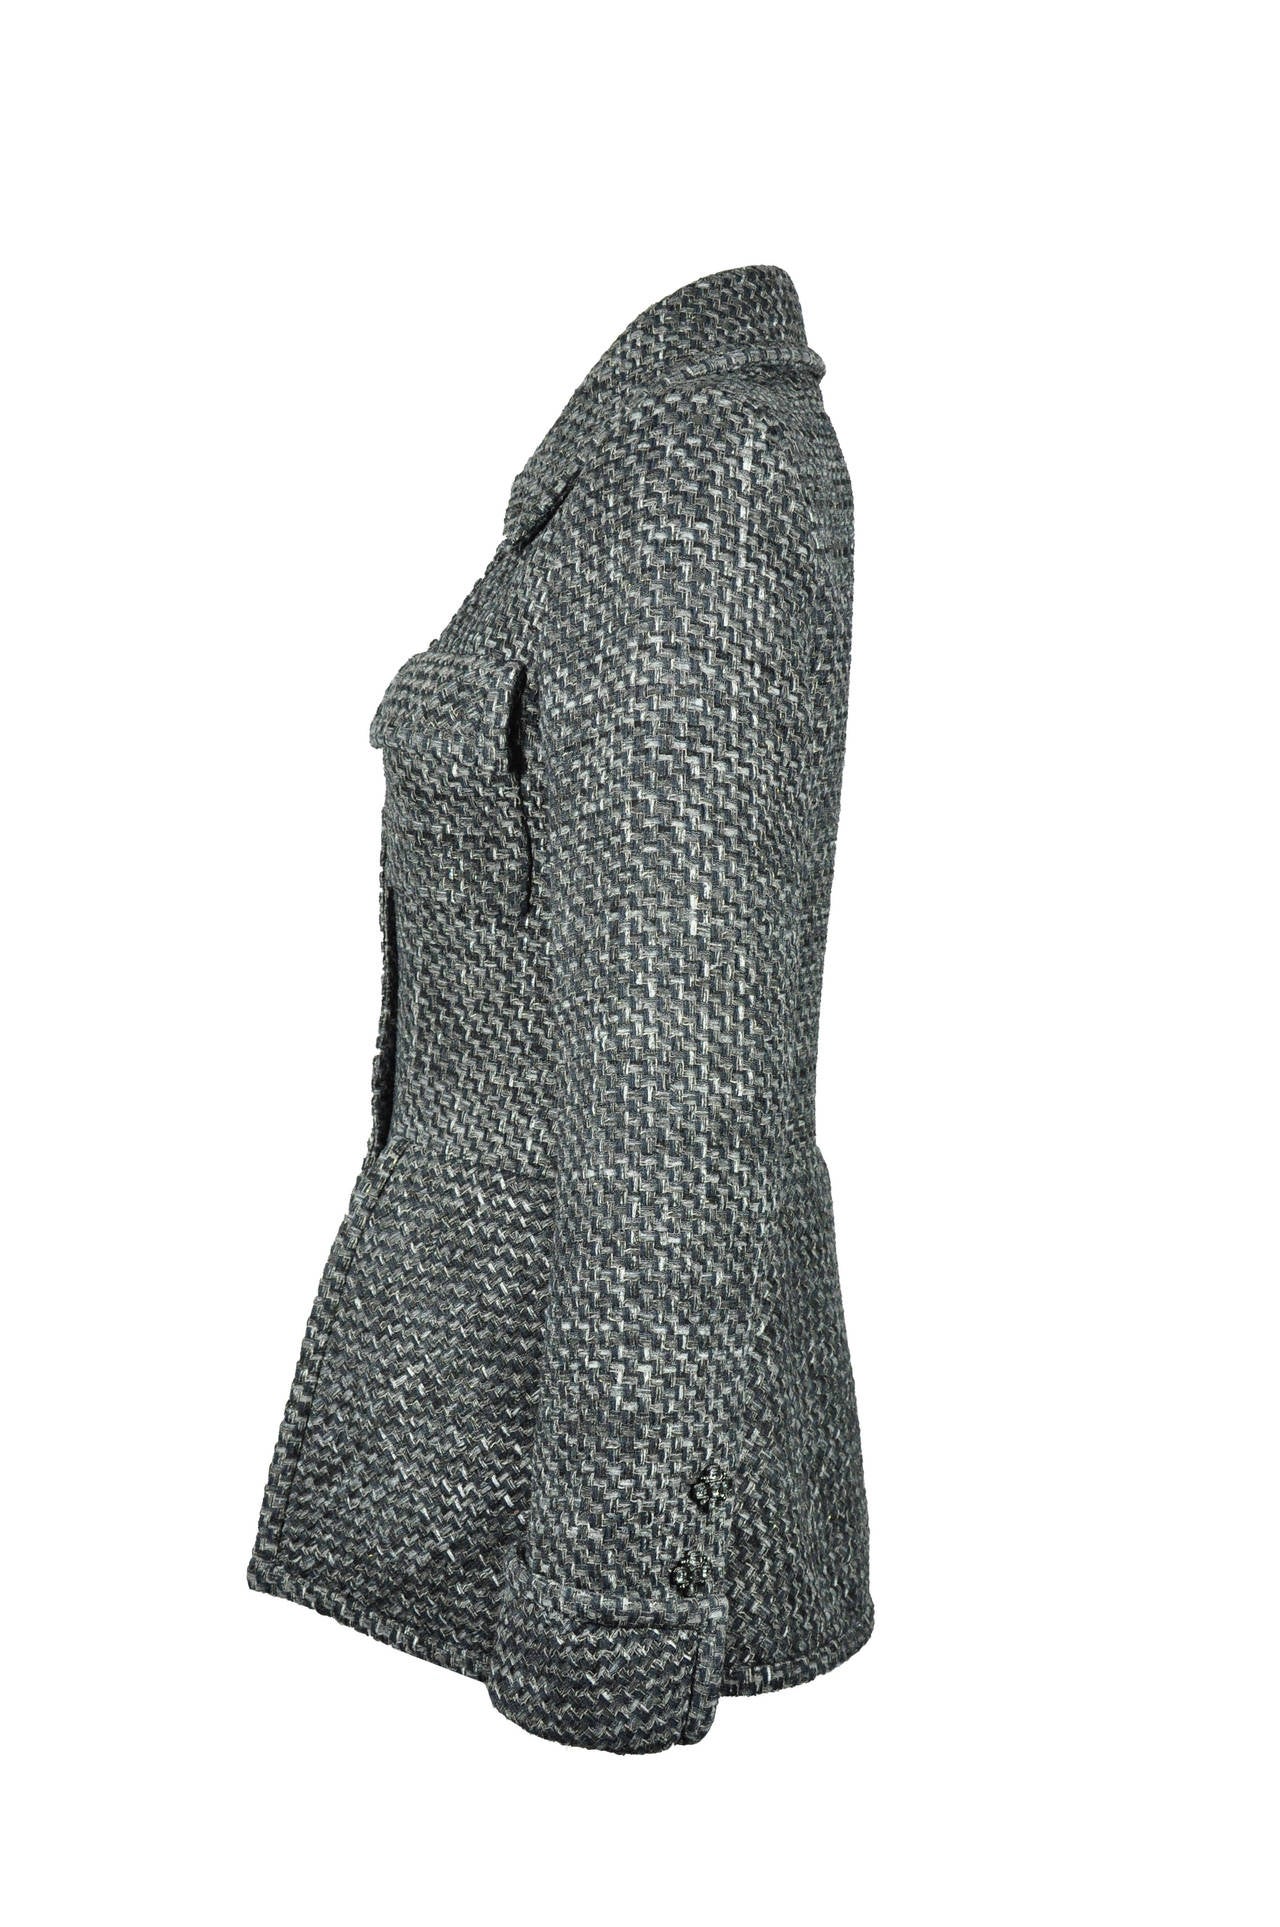 A classic and elegant fitted fantasy tweed jacket from Chanel 2015 Spring-summer collection.  It features with two front flap pockets, beautiful jeweled button fastenings through front with turned cuffs, different hemline with a back vent.  Fully